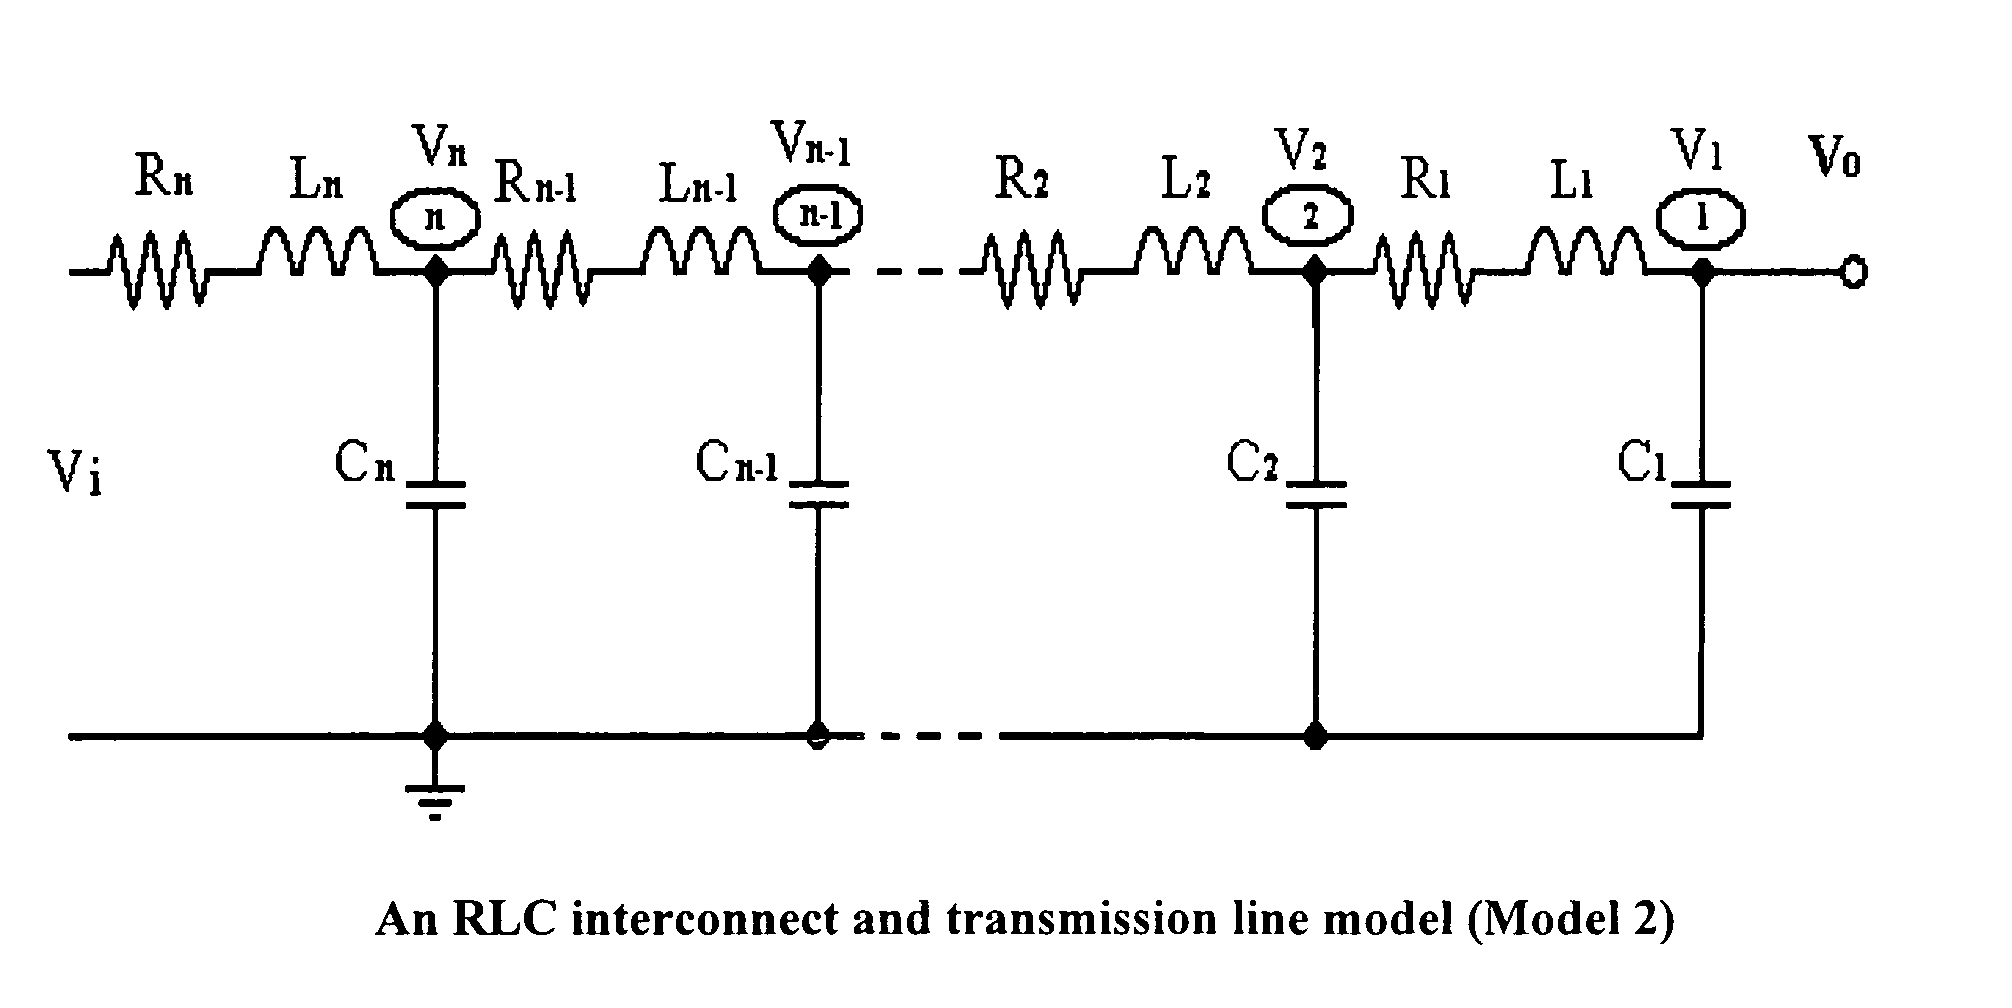 Methods to generate state space models by closed forms and transfer functions by recursive algorithms for RLC interconnect and transmission line and their model reduction and simulations